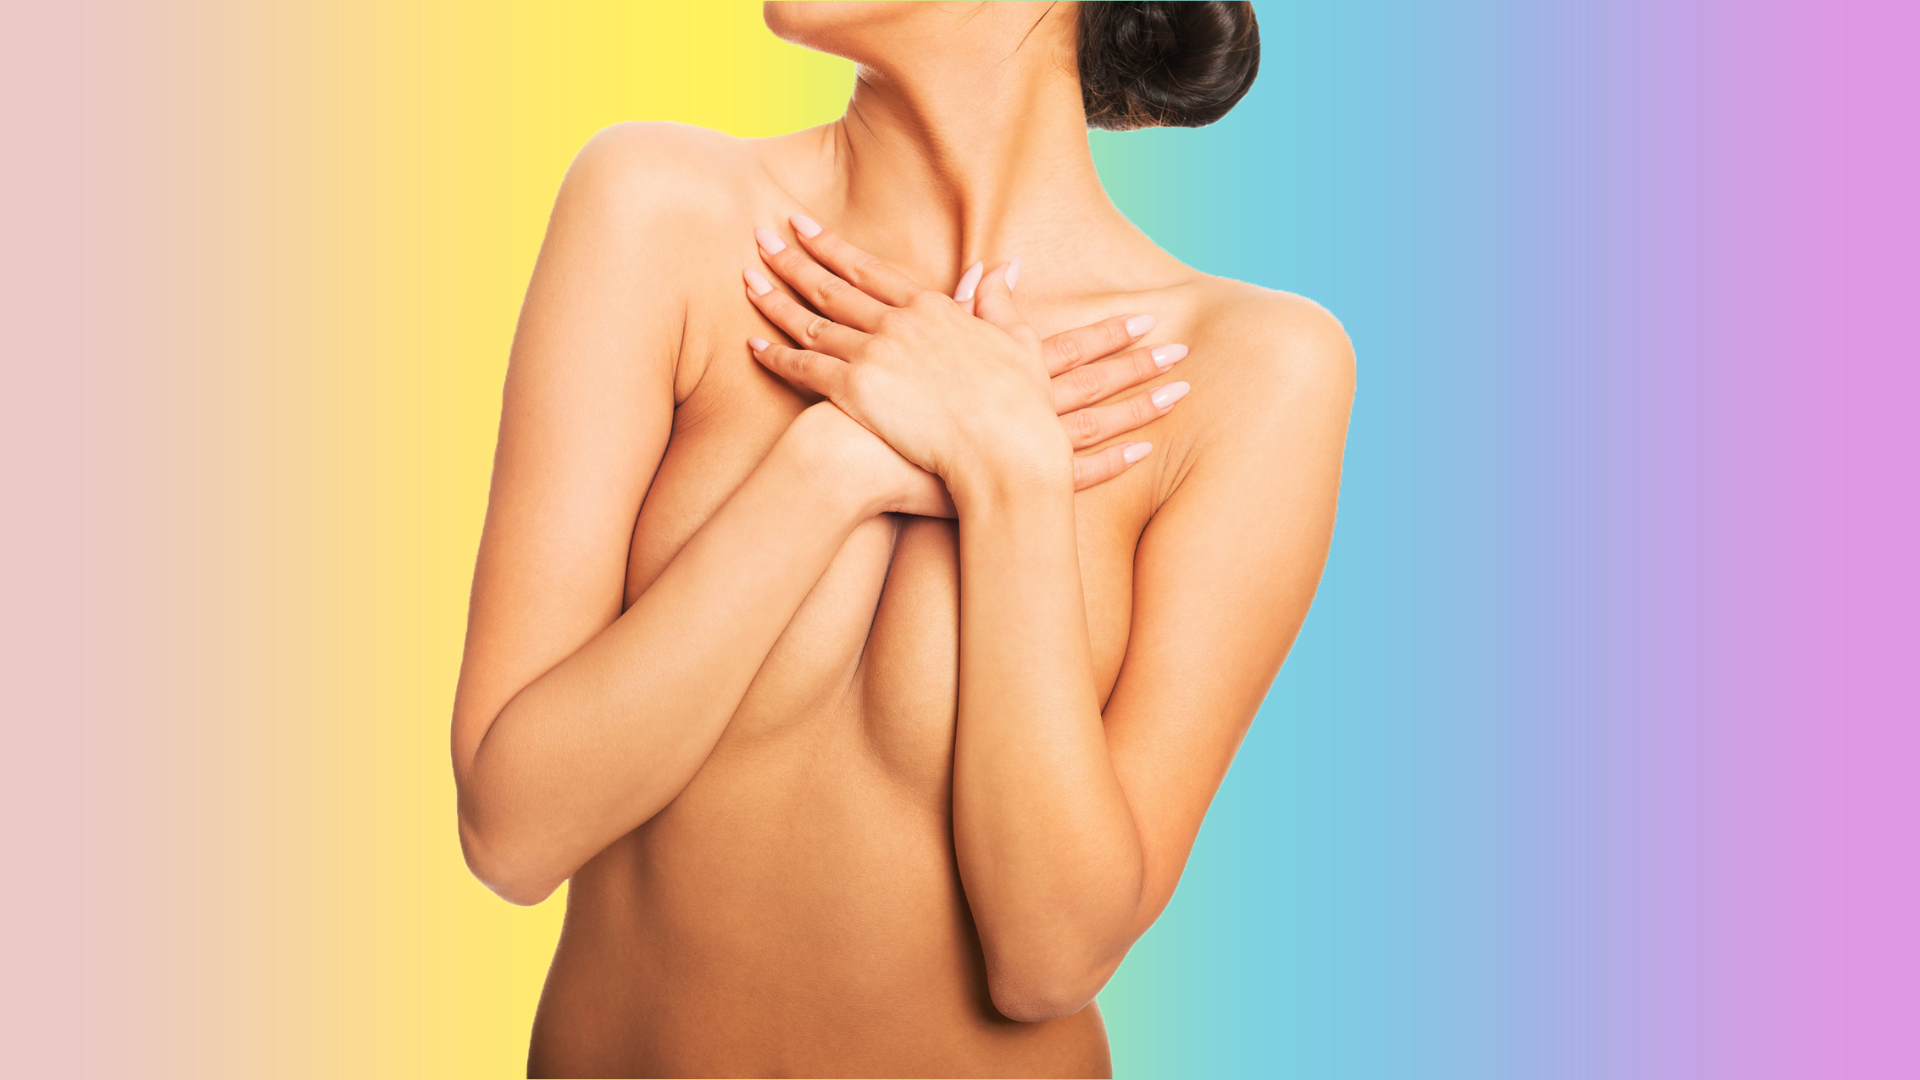 Breast Massage Benefits Are Hard to Prove, But I Loved It photo image